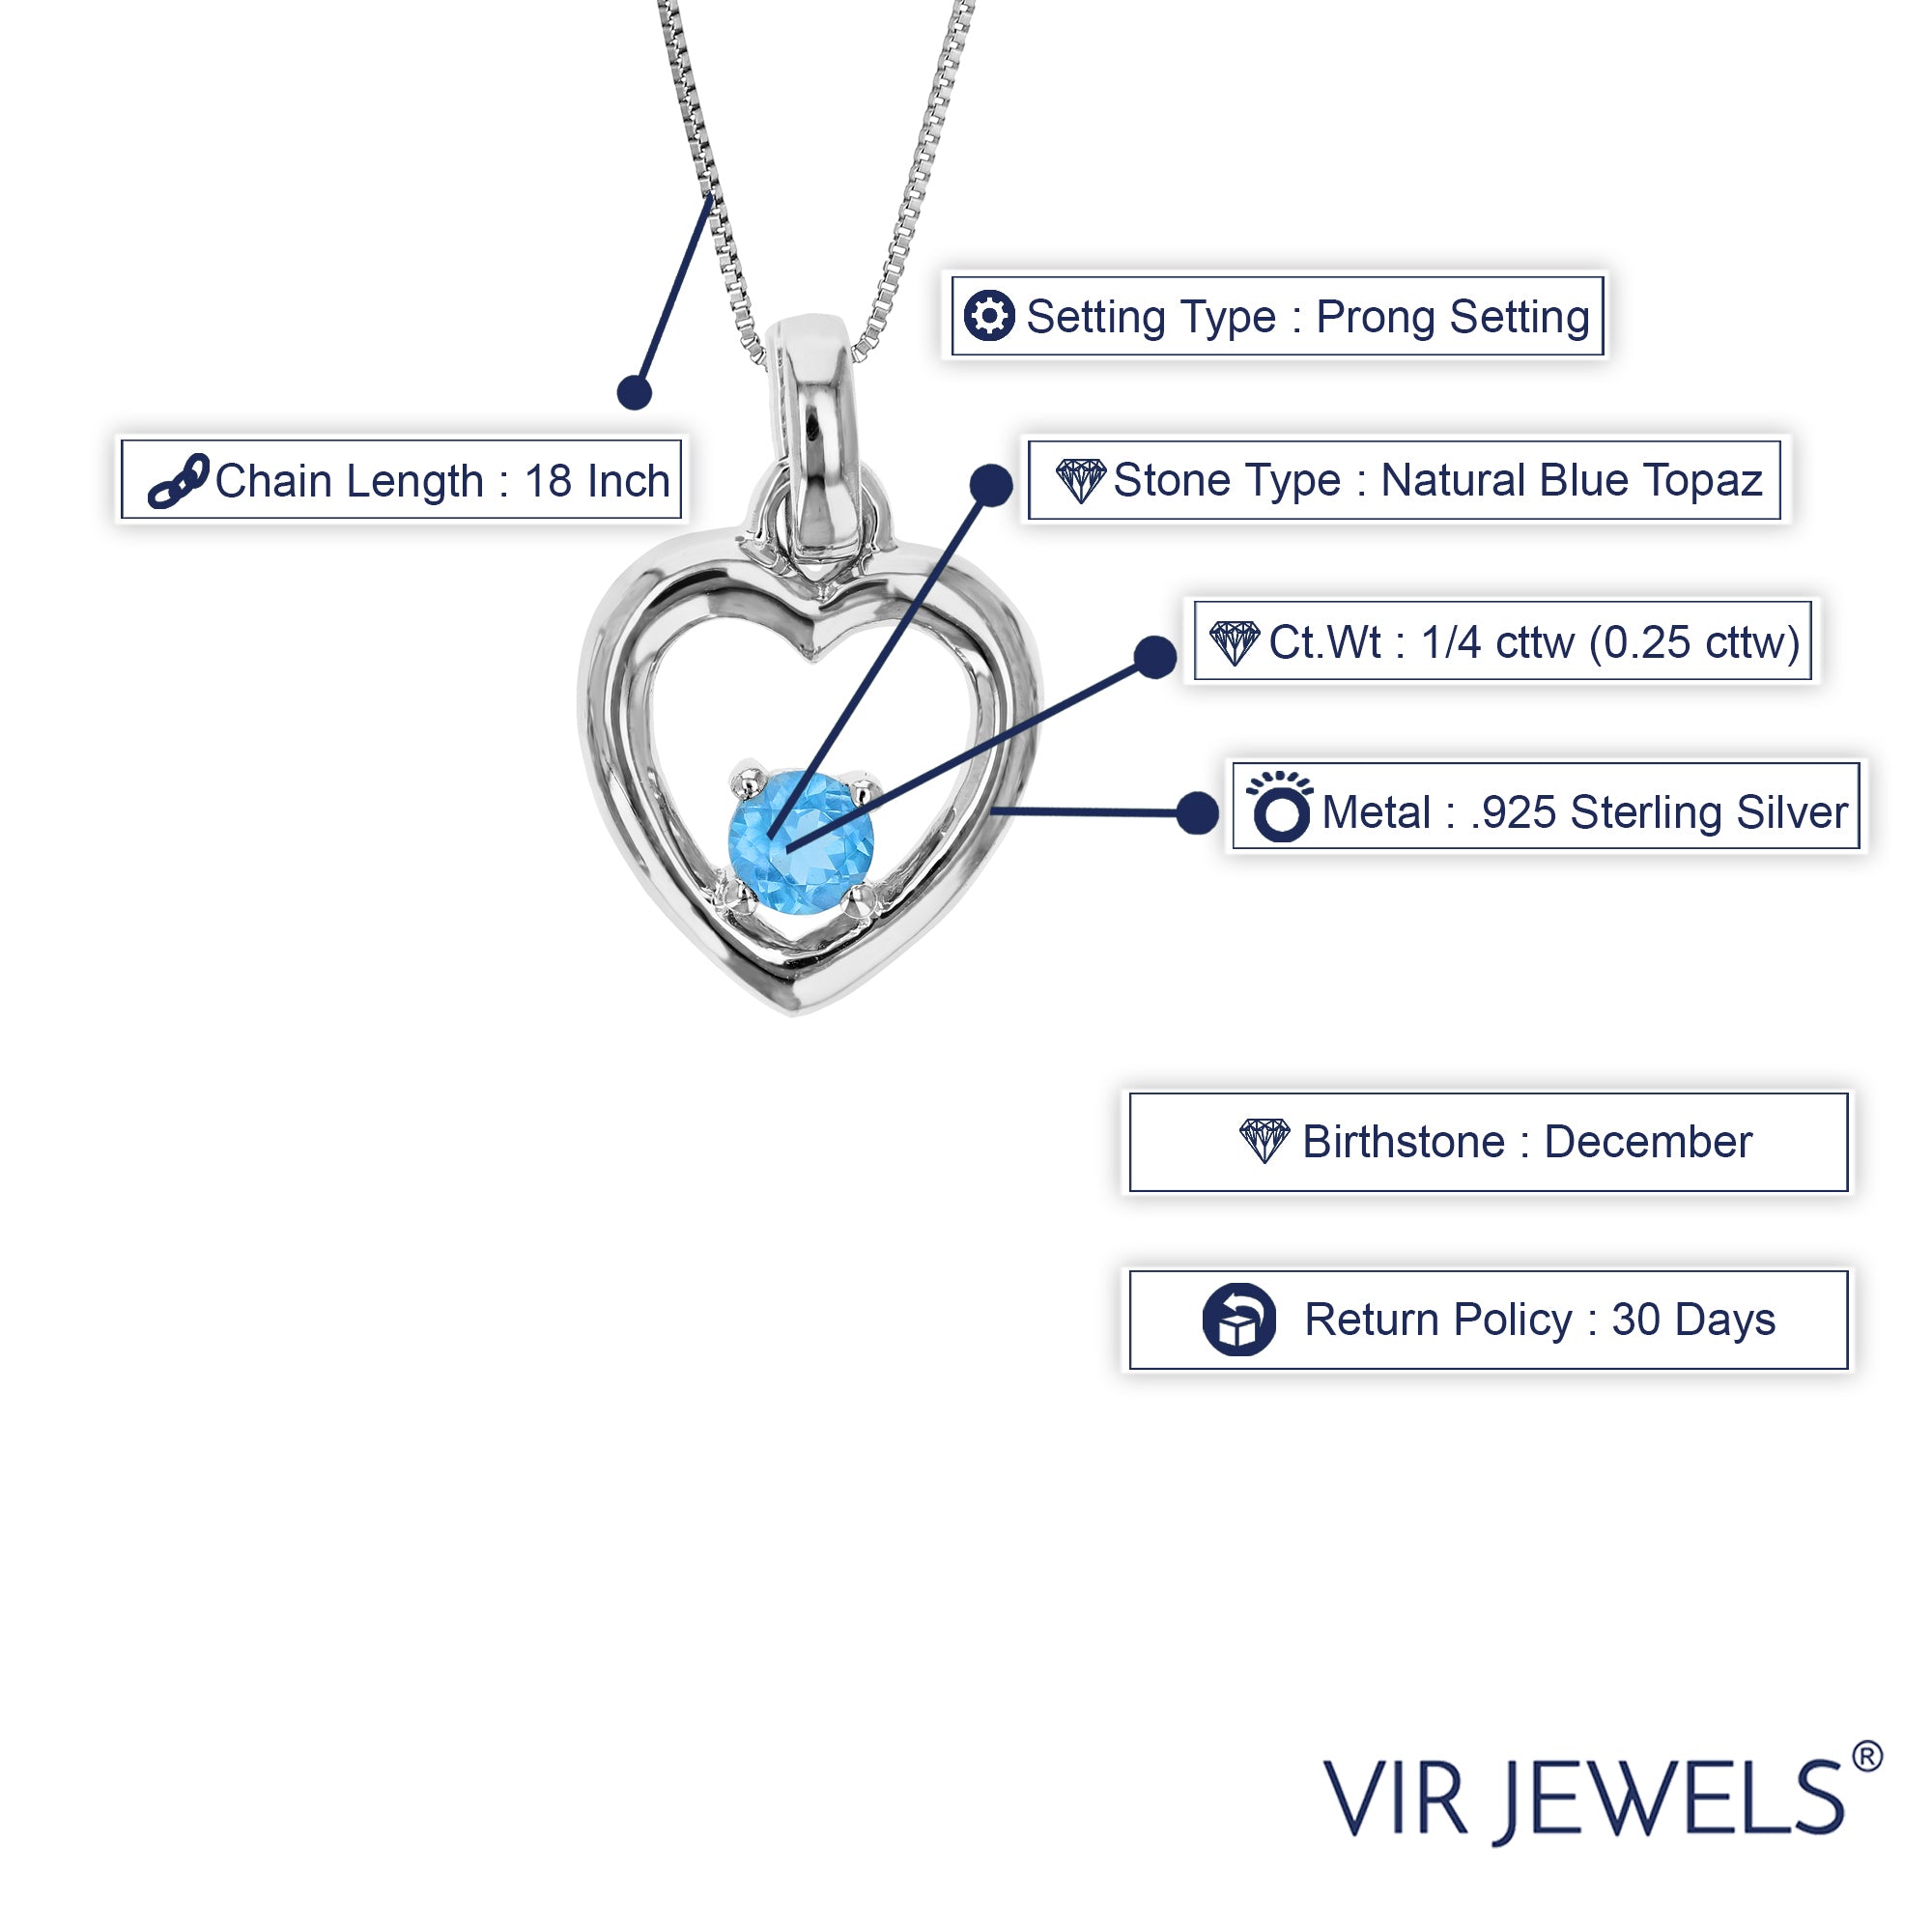 1/4 cttw Pendant Necklace, Swiss Blue Topaz Pendant Necklace for Women in .925 Sterling Silver with Rhodium, 18 Inch Chain, Prong Setting